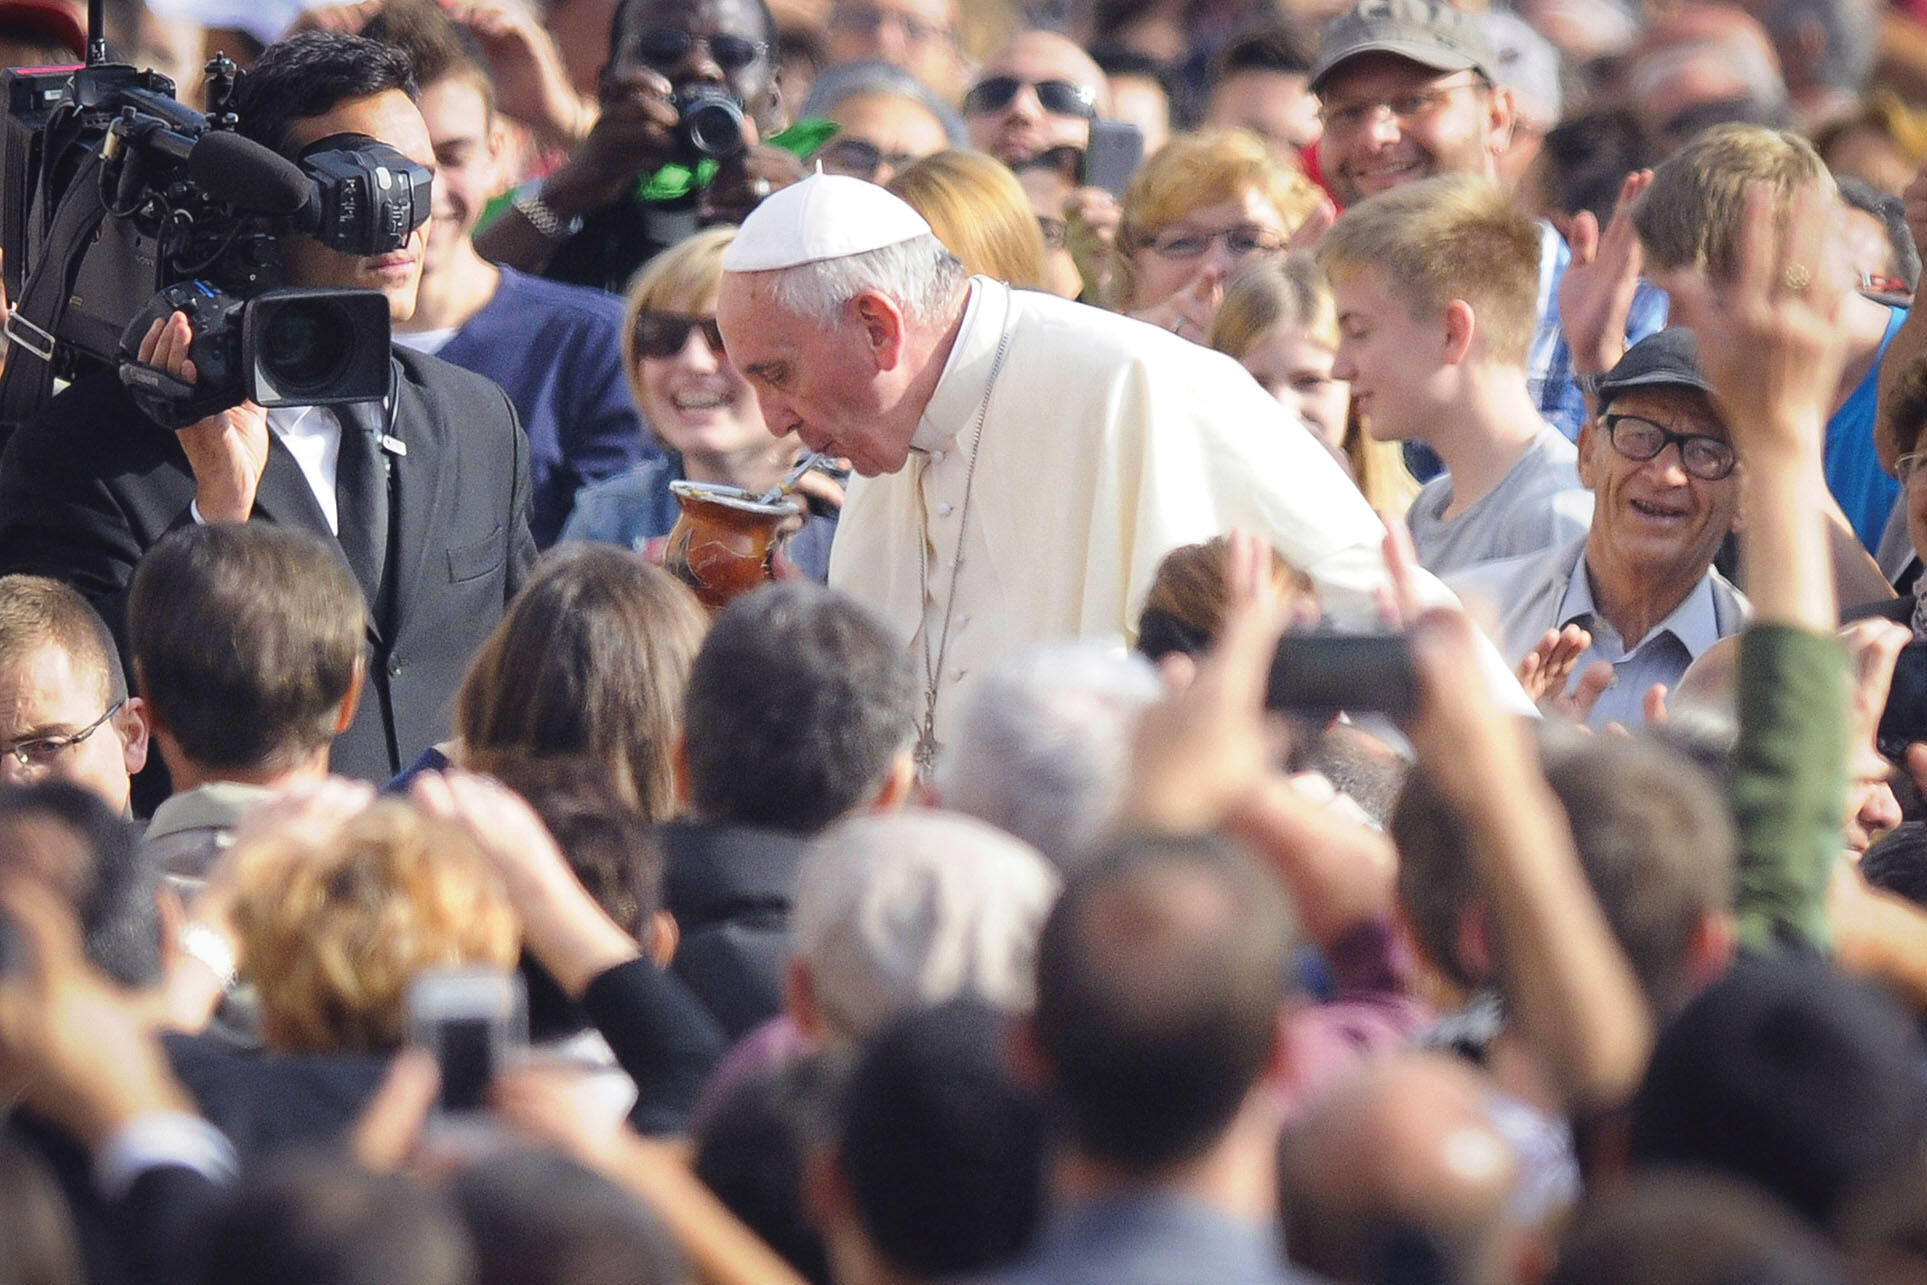 Pope Francis sips from a mug of mate offered by a pilgrim in St. Peter’s Square. (Photo from Associated Press.)